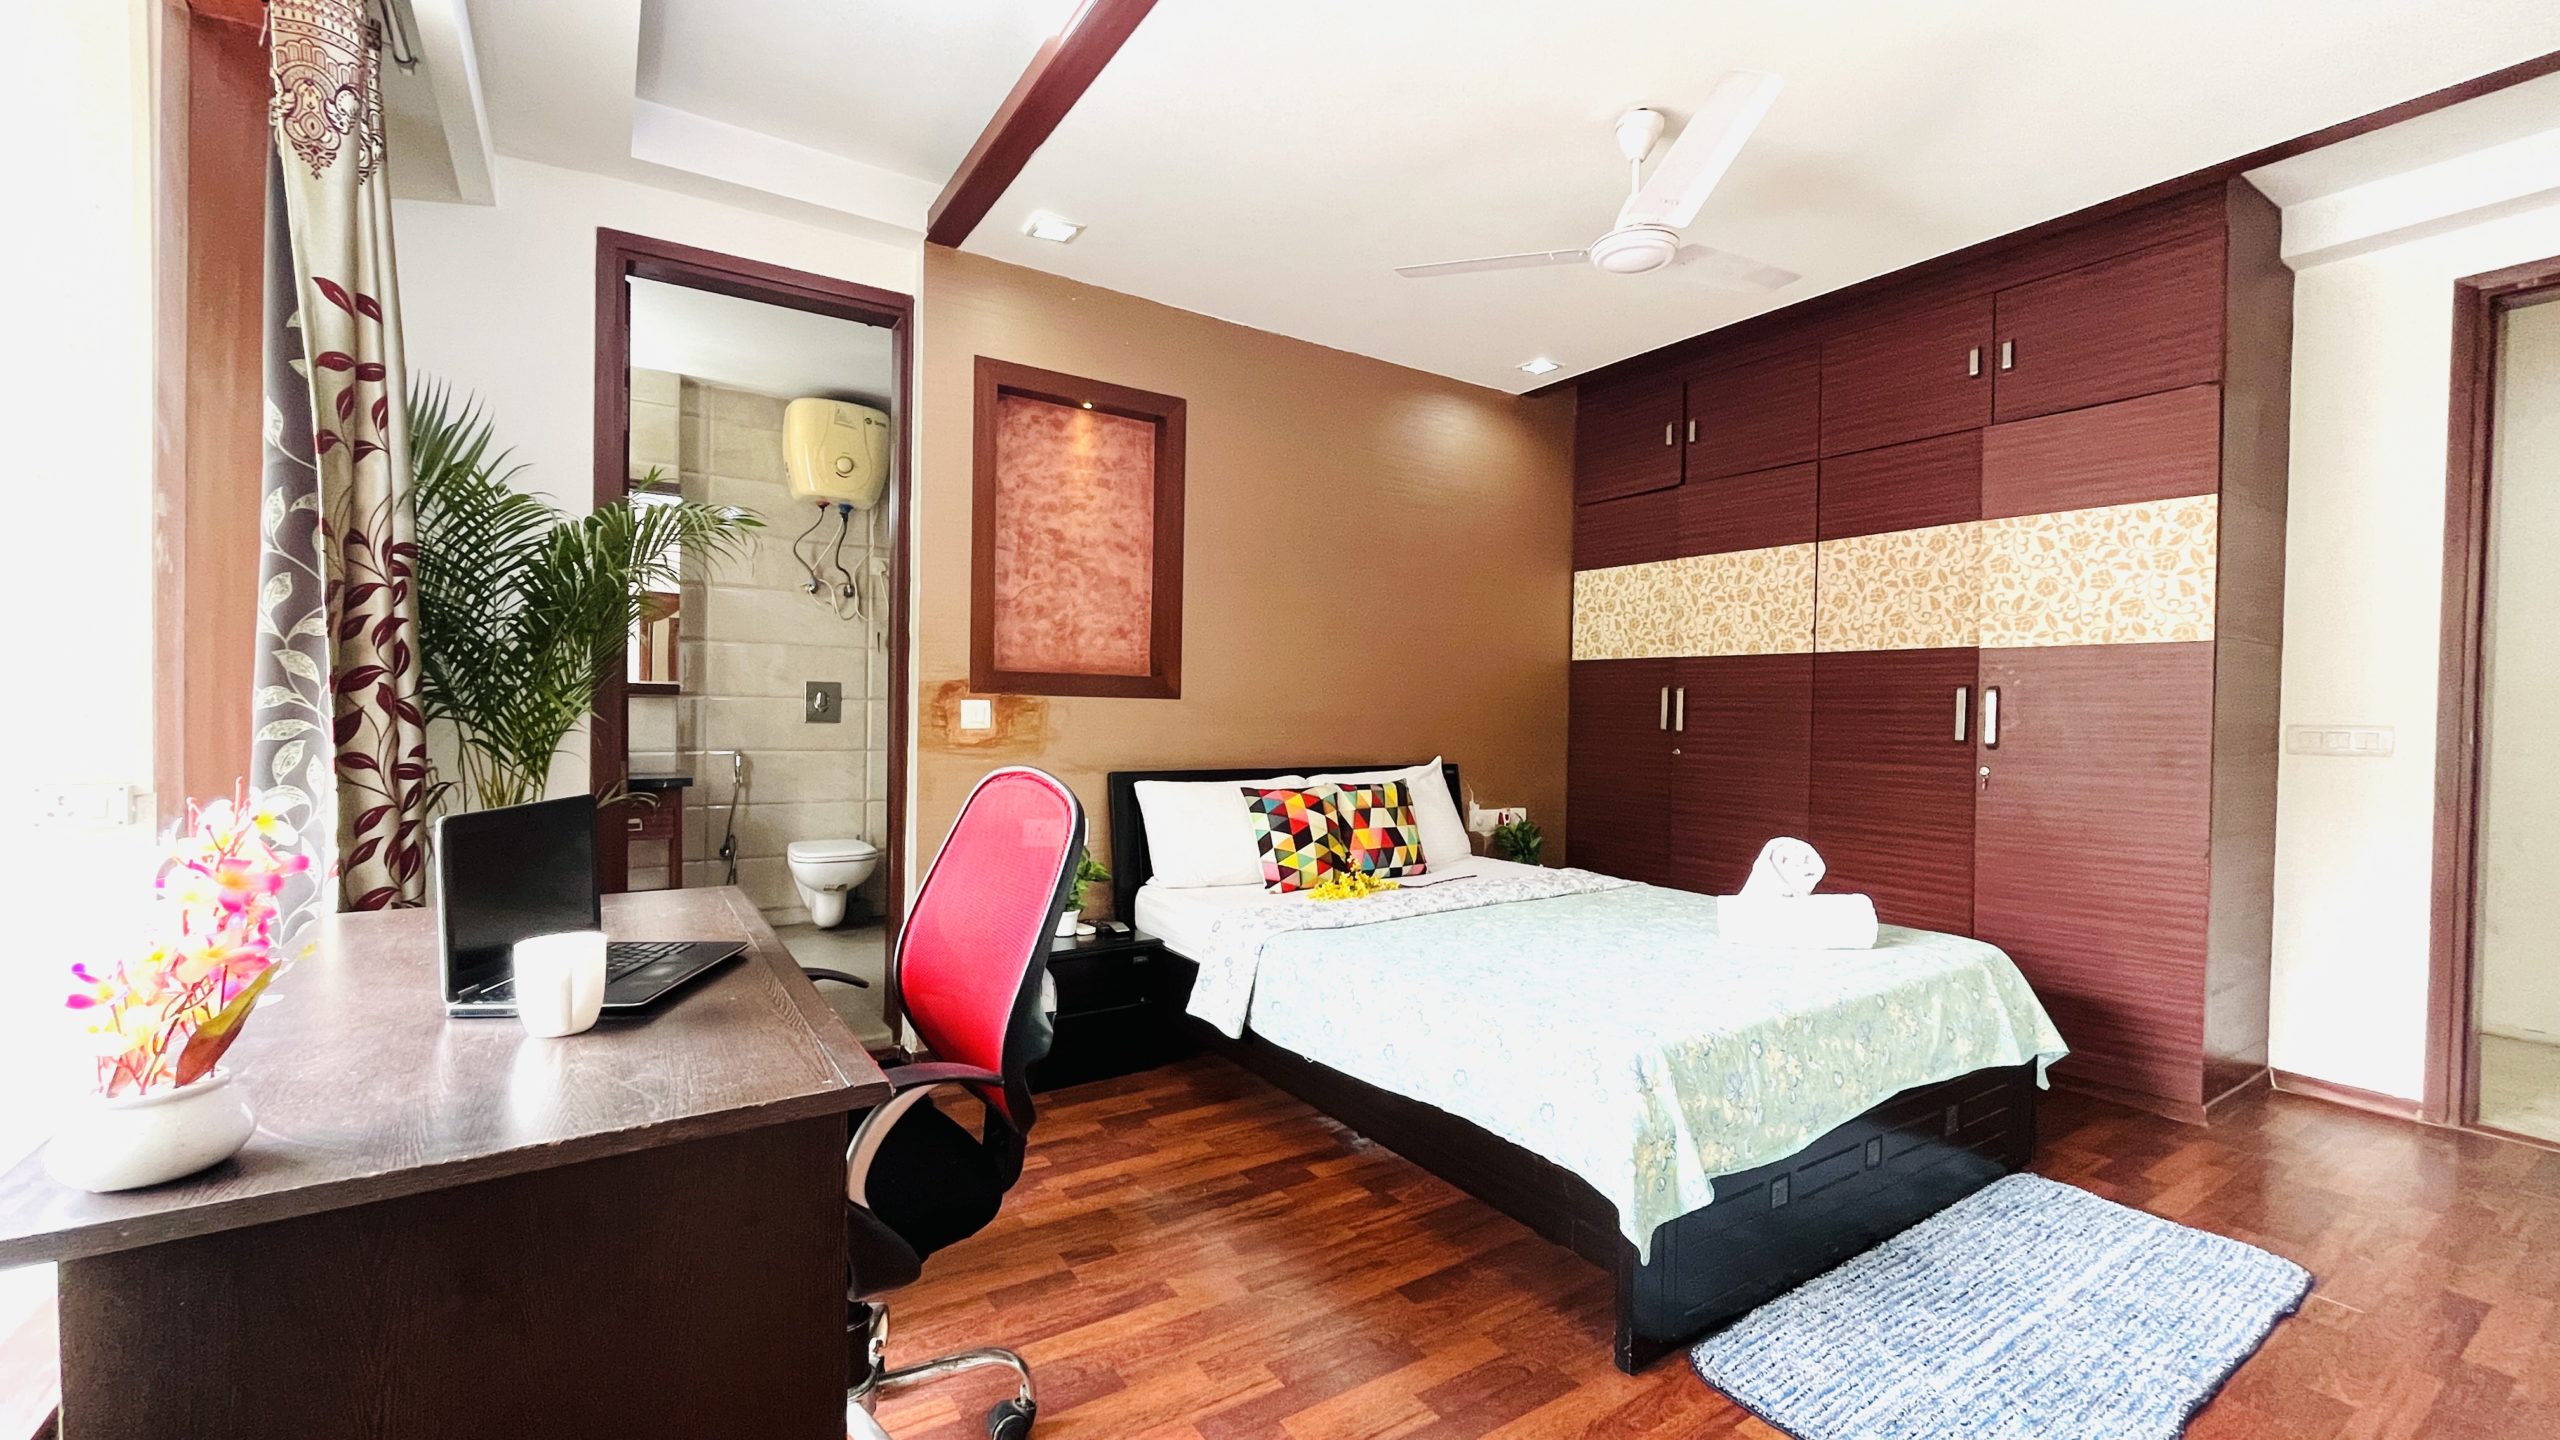 Coral's Service apartmnets Hauz Khas Delhi- Hauz Khas's Serviced Residences offer fully furnished and serviced apartments in south Delhi.